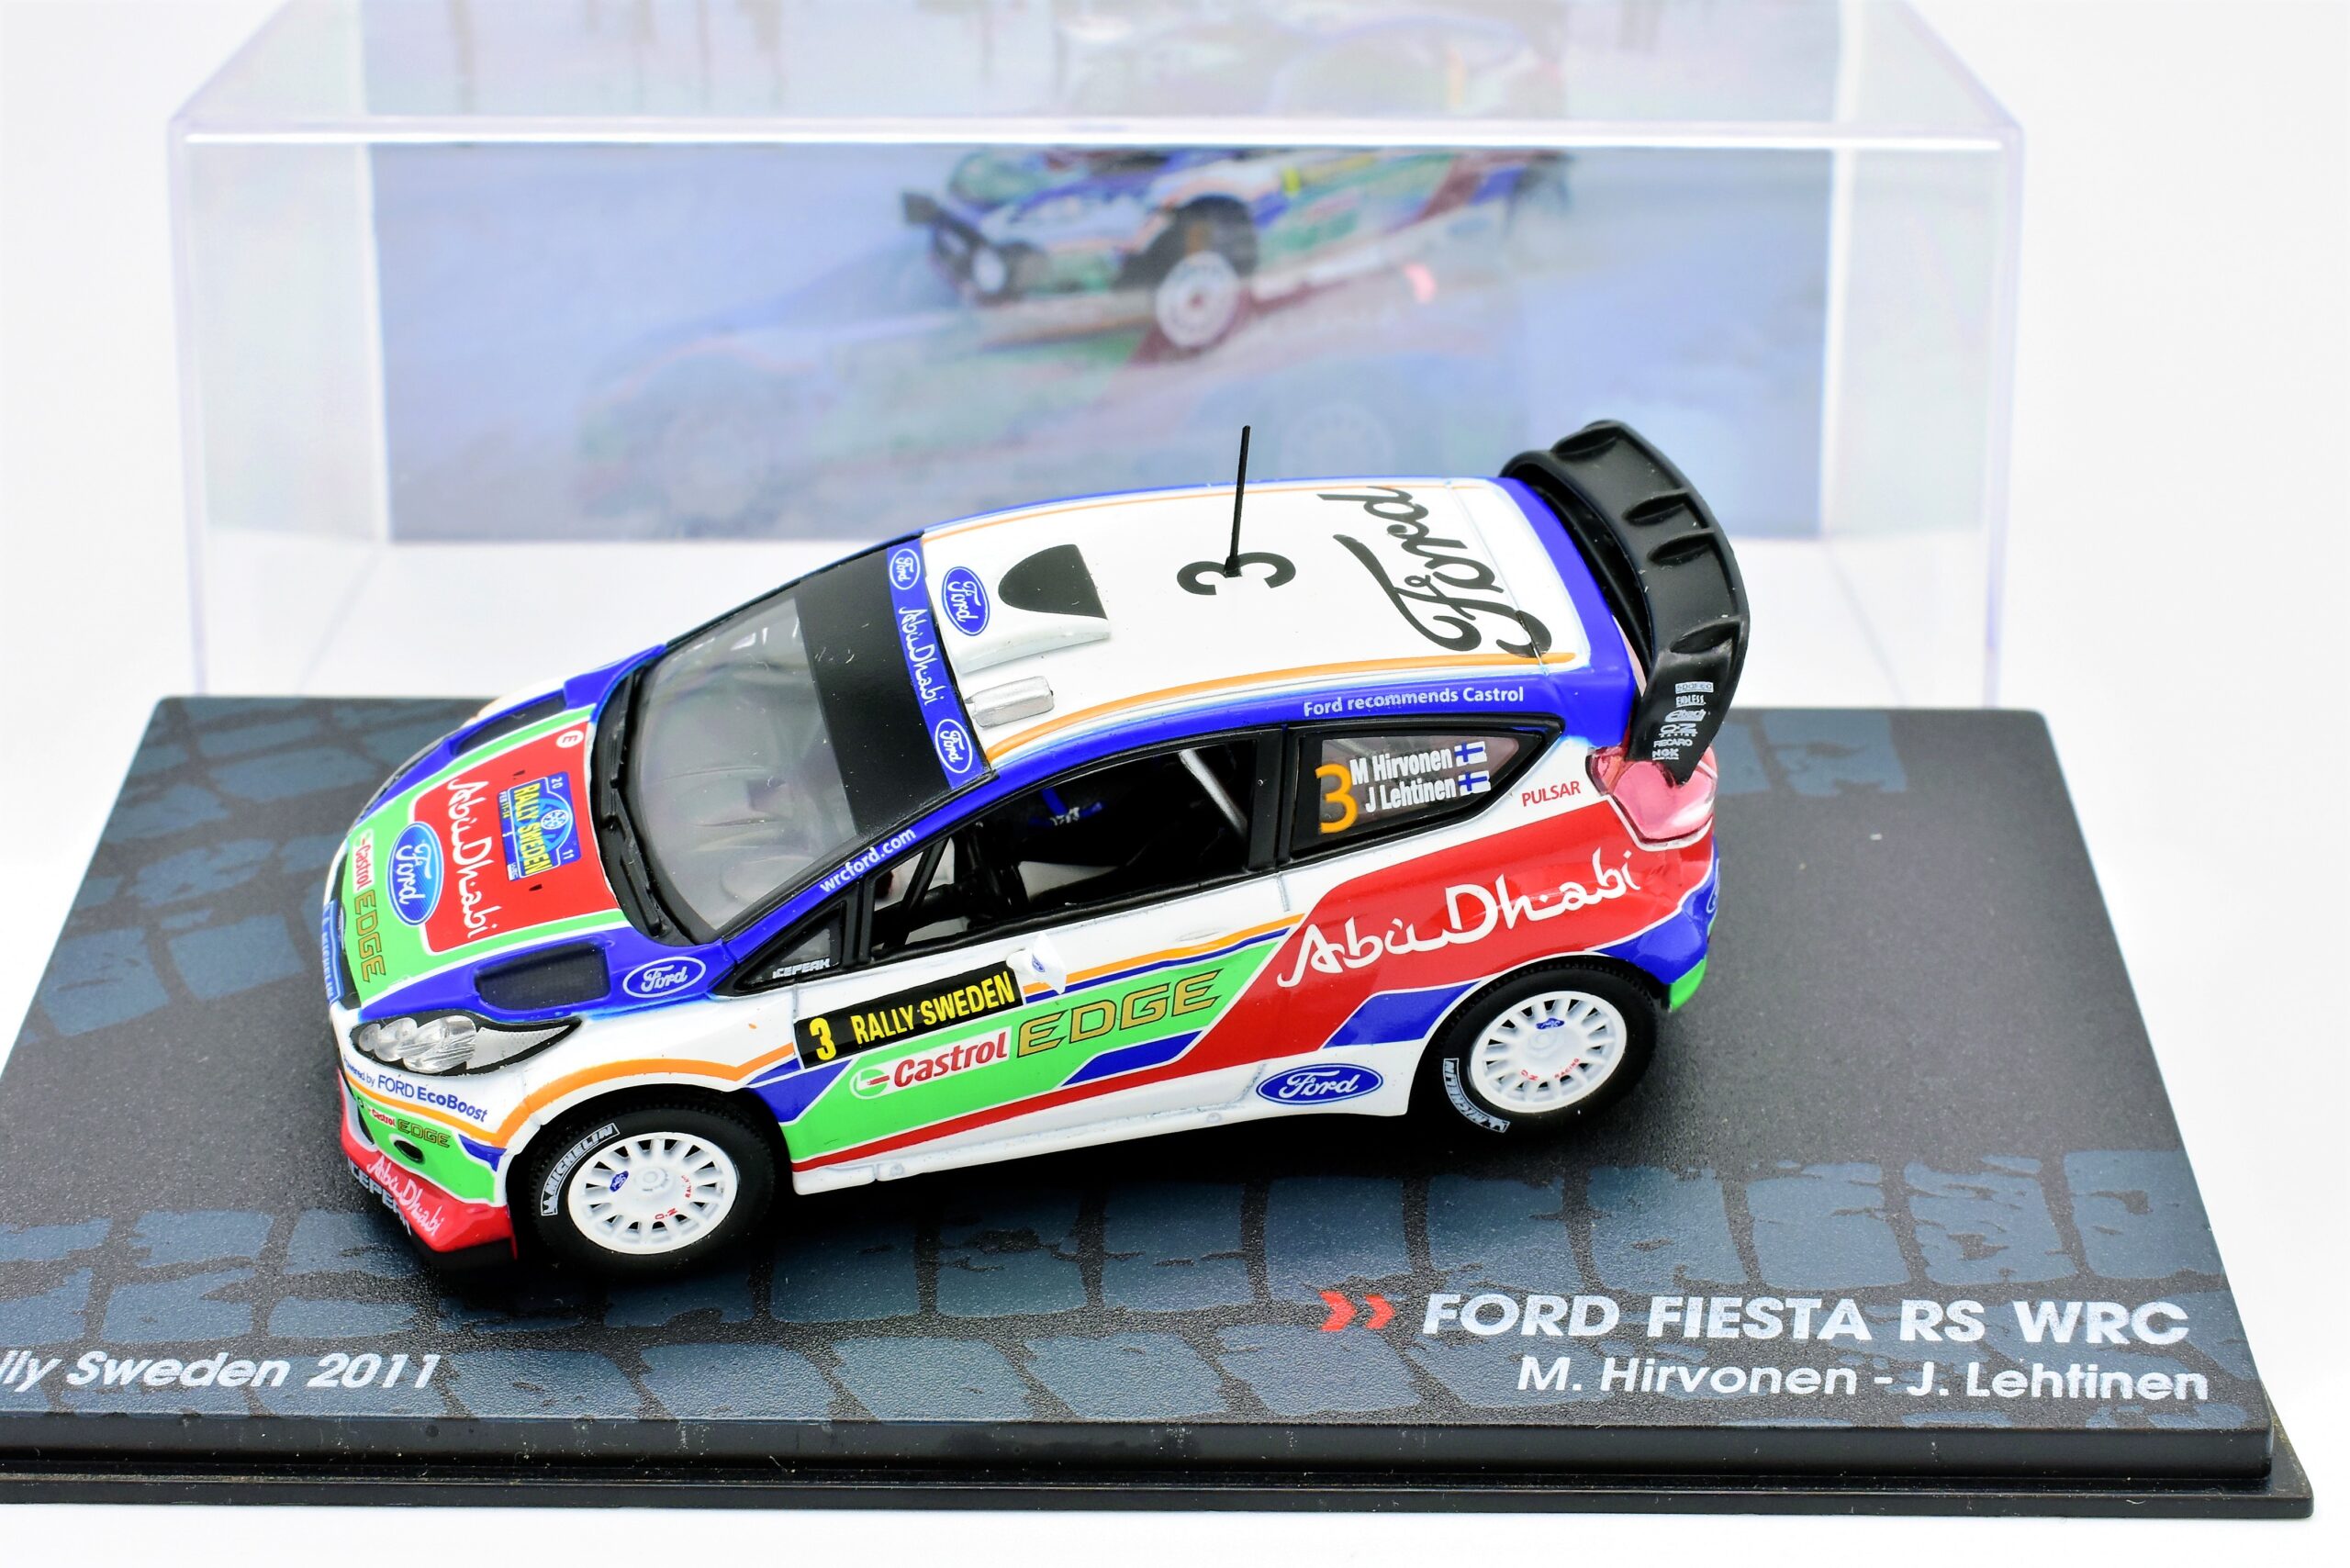 1:43 scale rally car model Ford Fiesta RS WRC vehiclesdiecastcollection